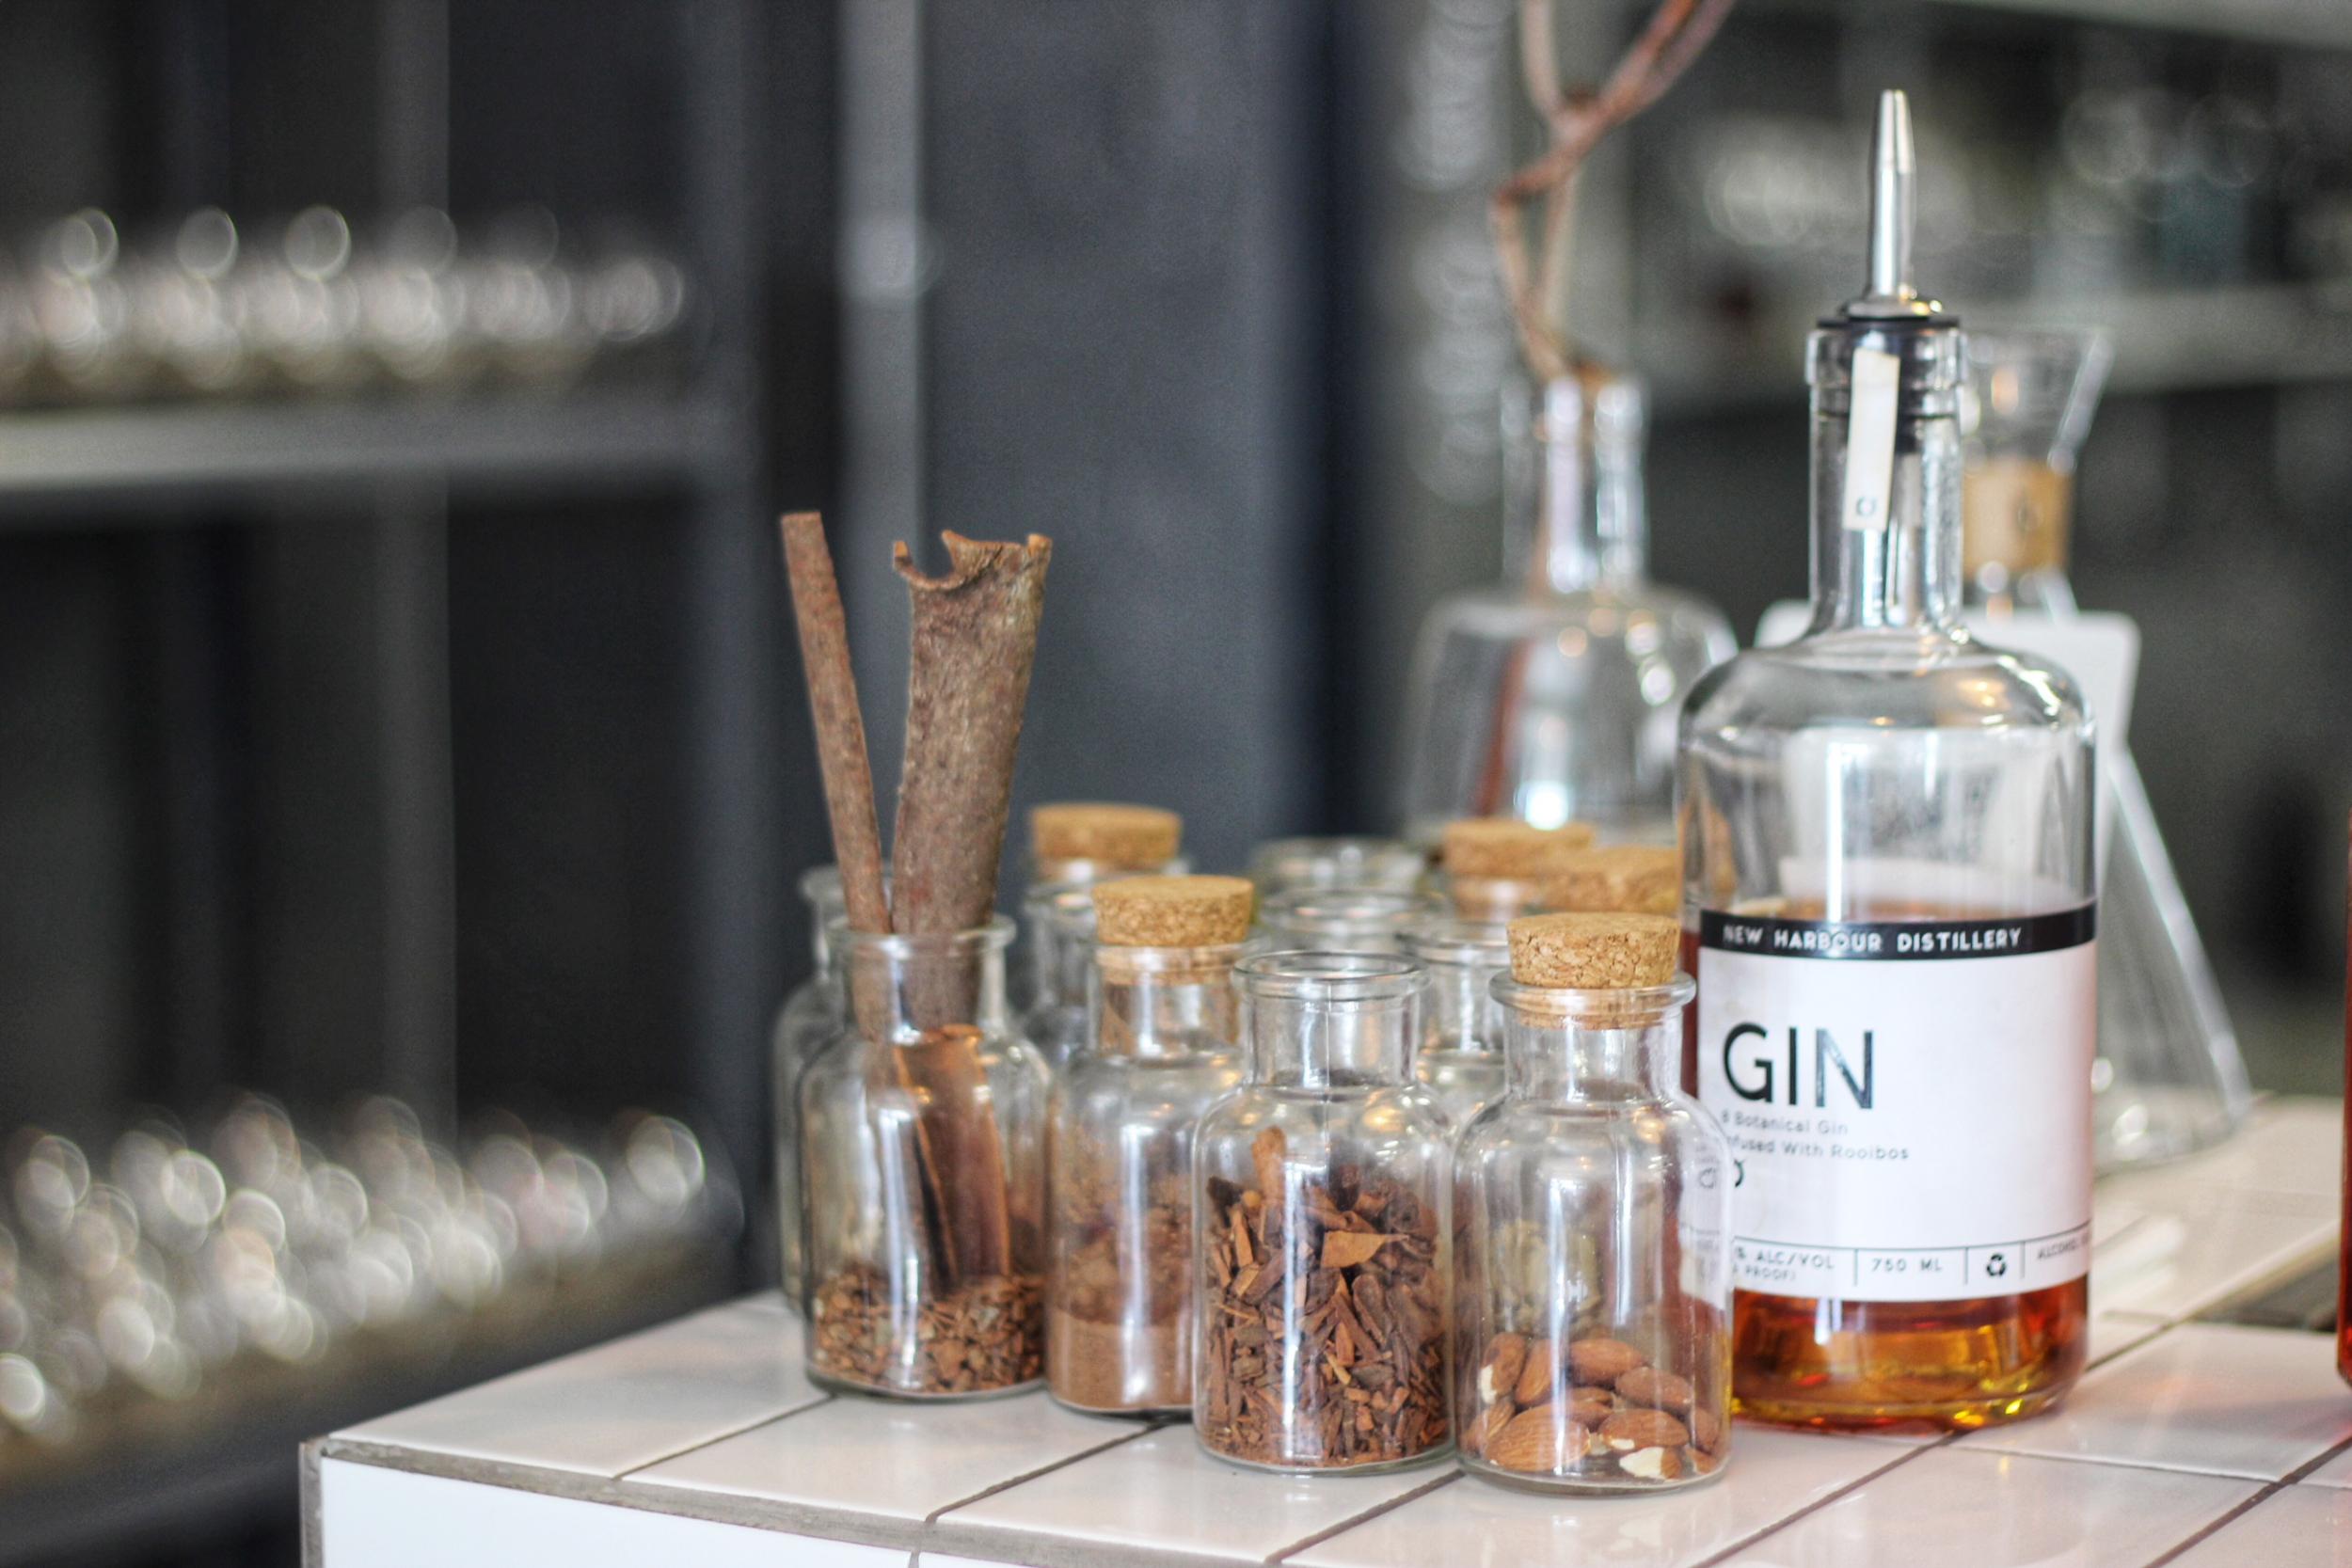 The number of South African gins has rocketed from two to more than 140 in a few years